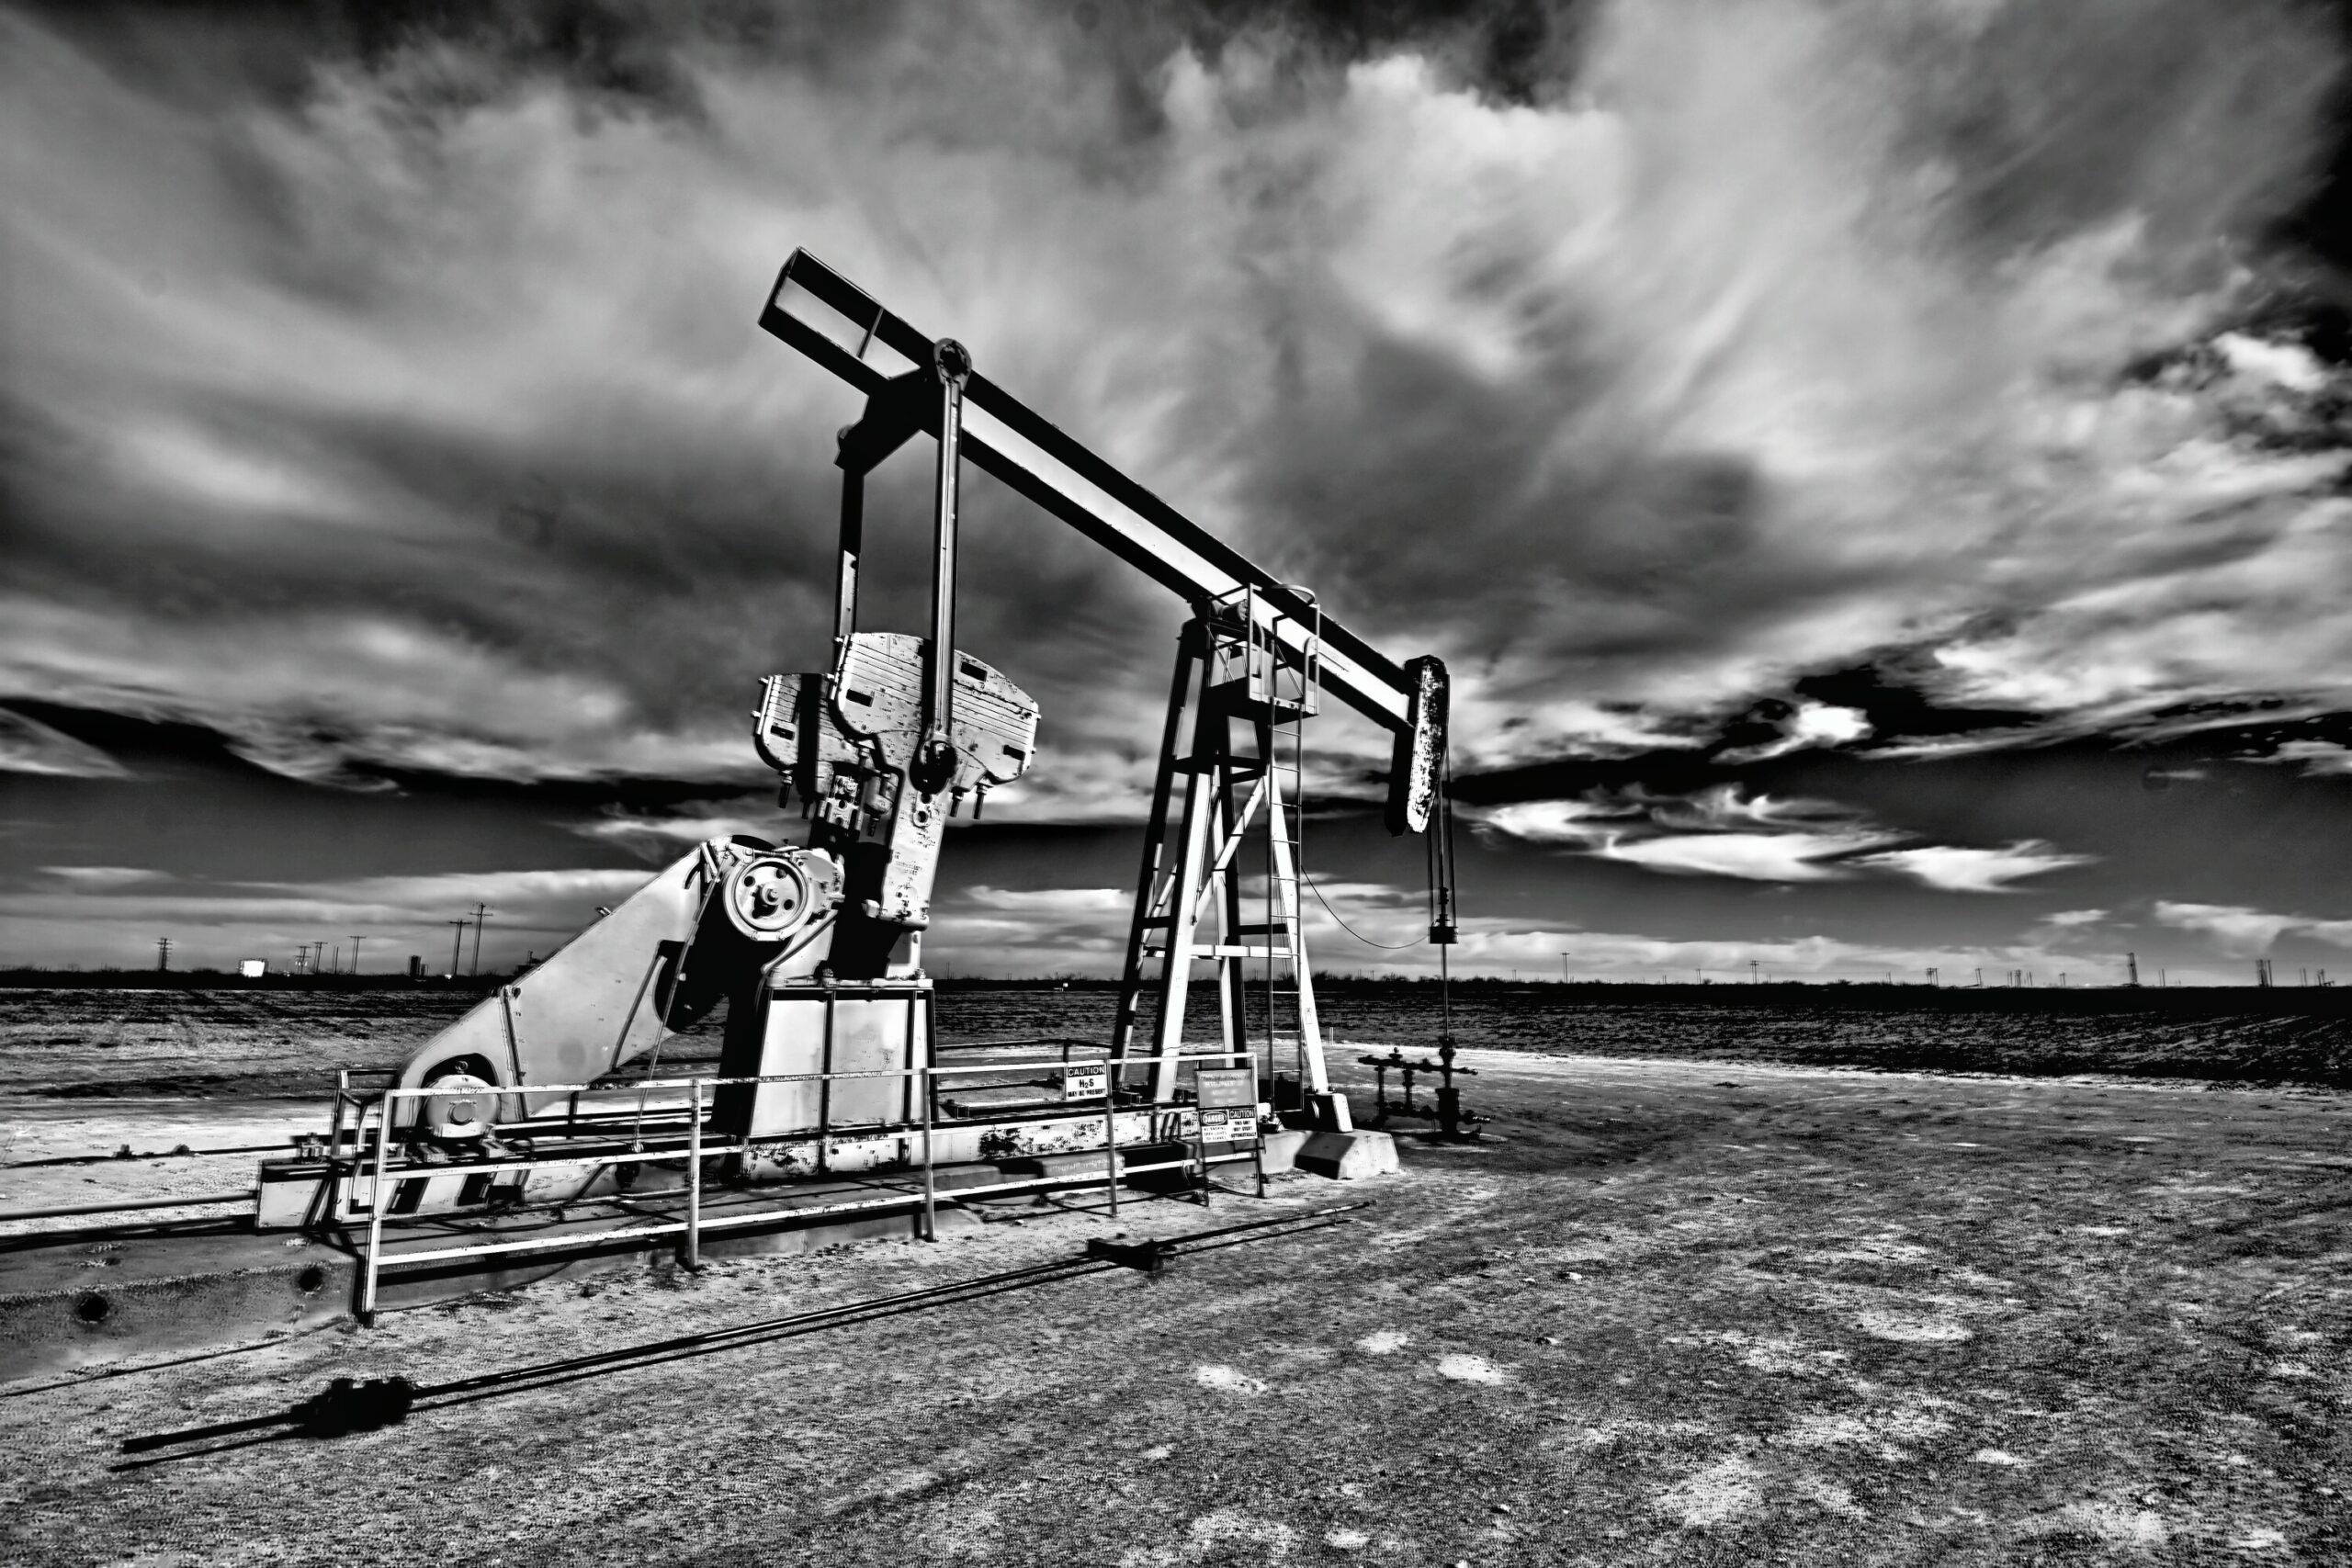 High-quality oil field supplies for efficient operations.